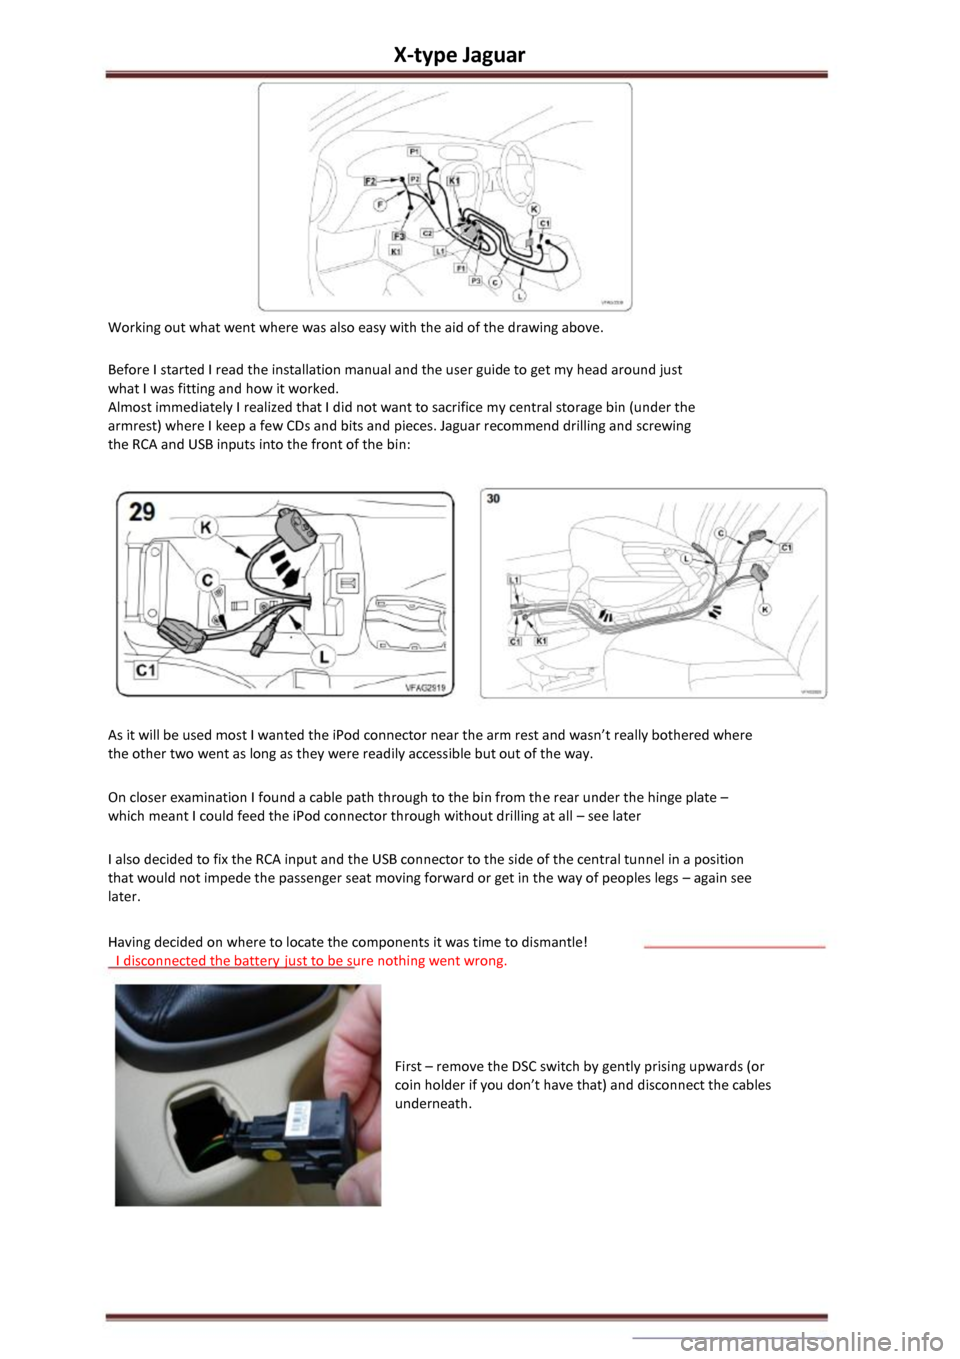 JAGUAR X TYPE 2002 1.G Owners Manual X-type Jaguar 
Working out what went where was also easy with the aid of the drawing above. 
Before I started I read the installation manual and the user guide to get my head around just 
what I was f